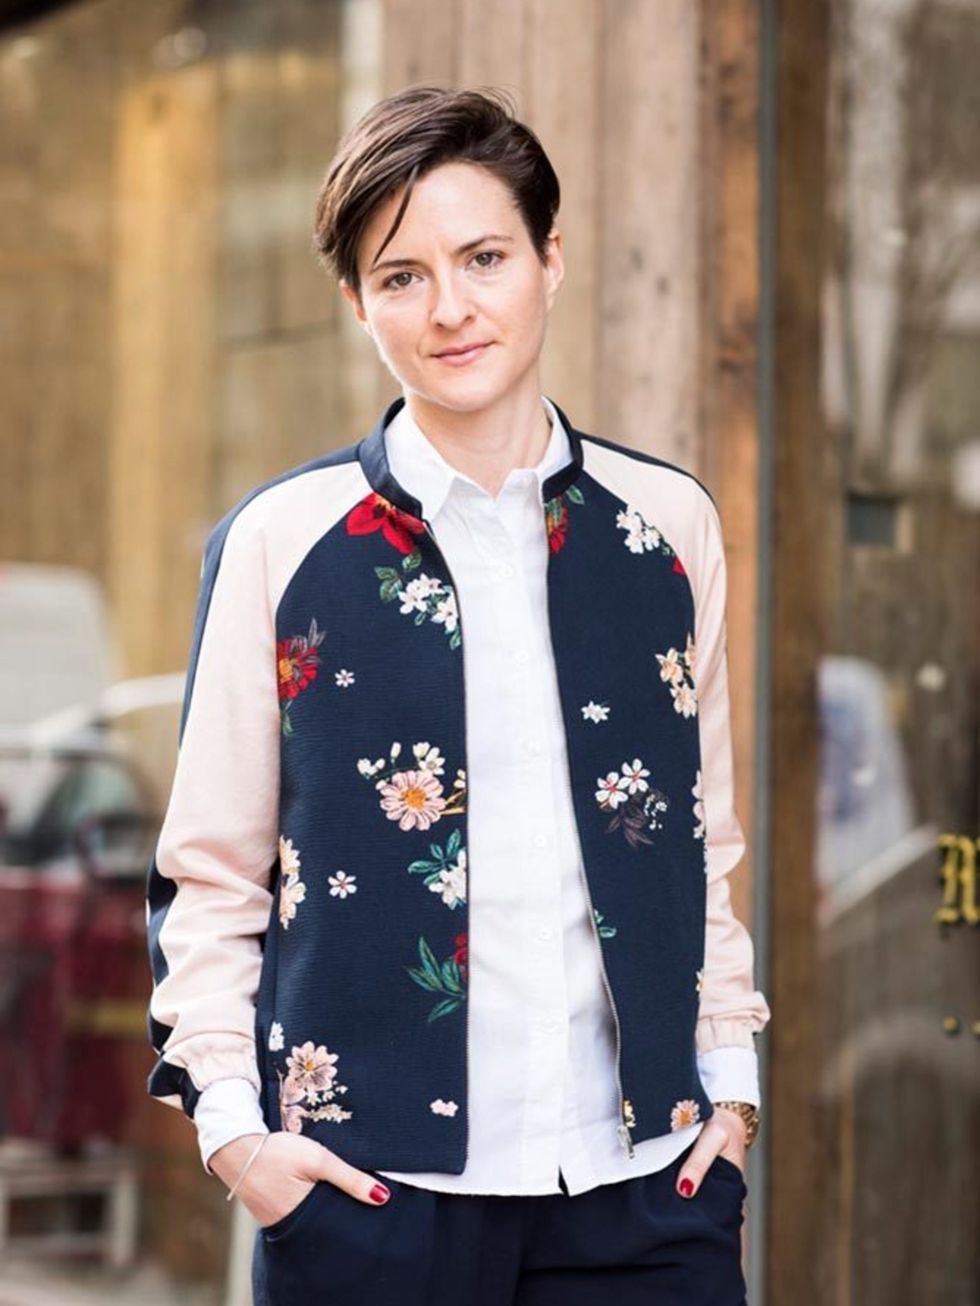 <p>Lotte Jeffs, Deputy Editor</p>

<p>Zara bomber jacker and trousers, Paul Smith shirt, Nike Air Max Thea trainers, Opening Ceremony bag</p>